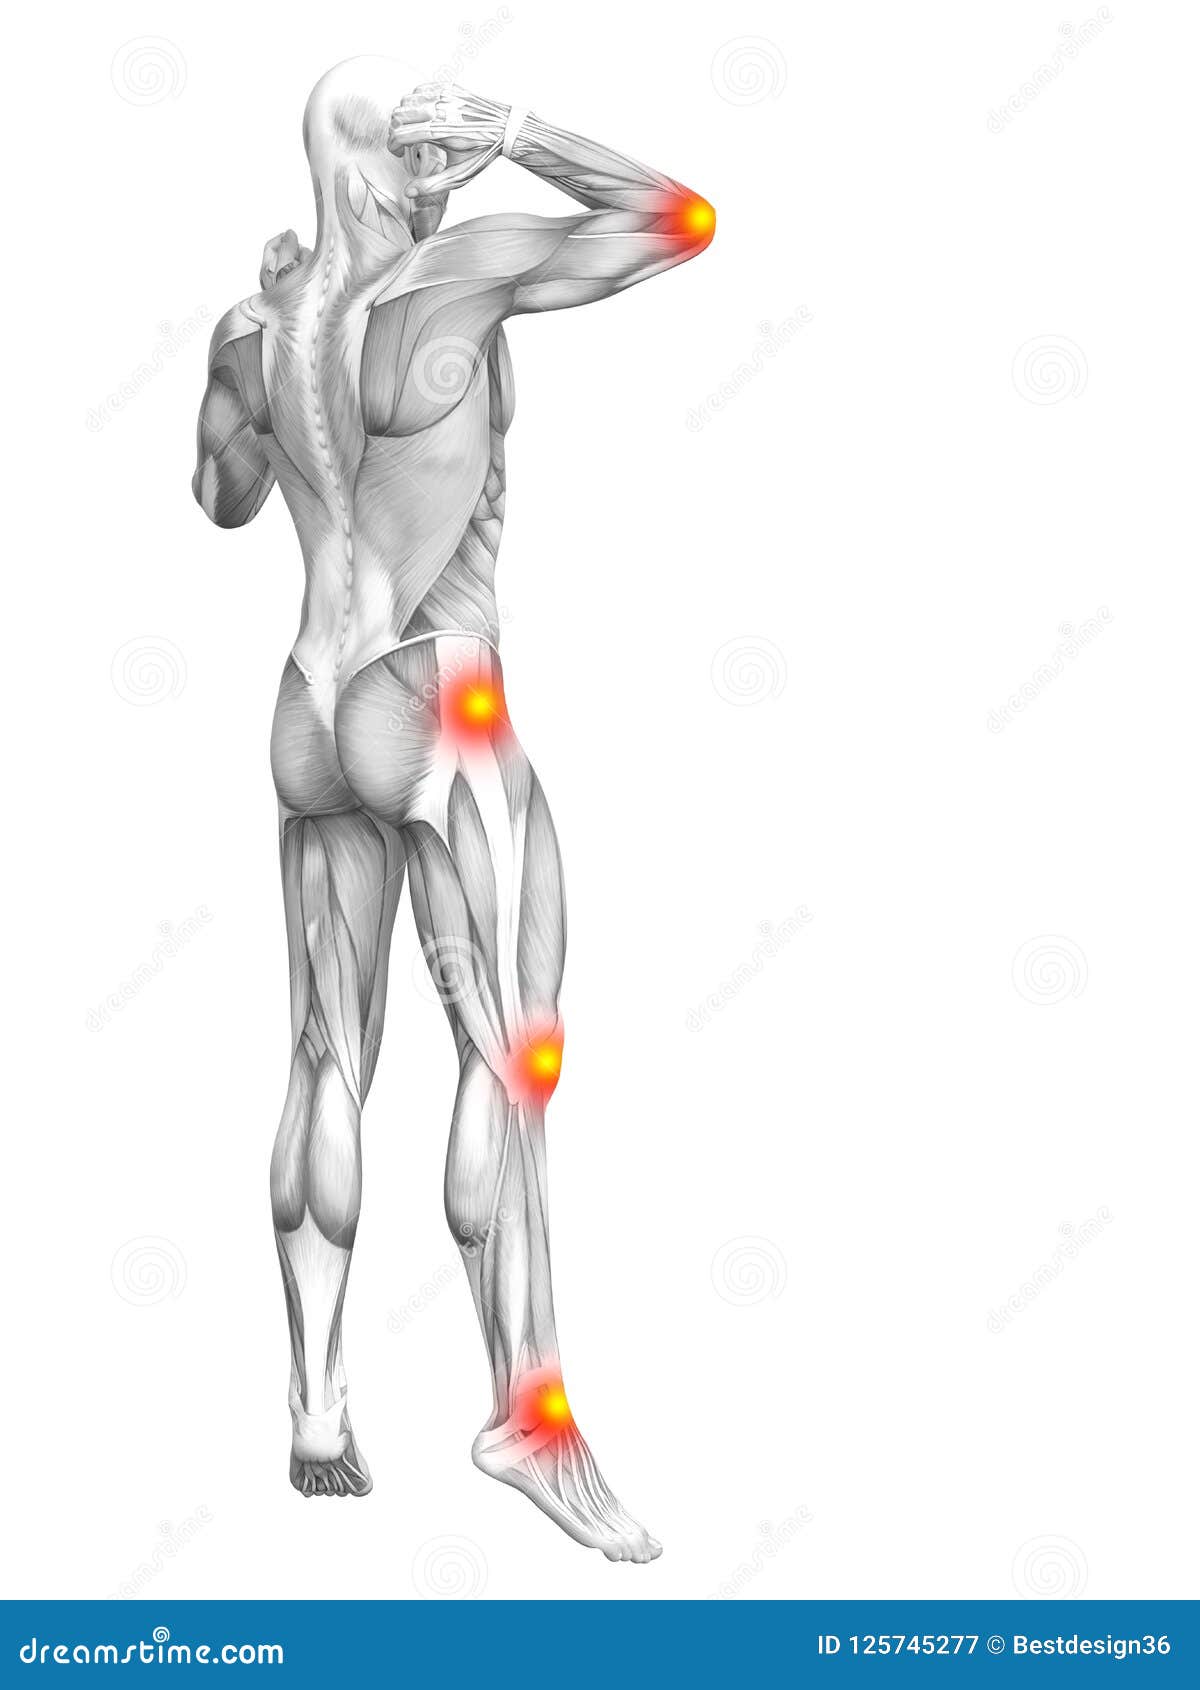 human muscle anatomy articular joint pain